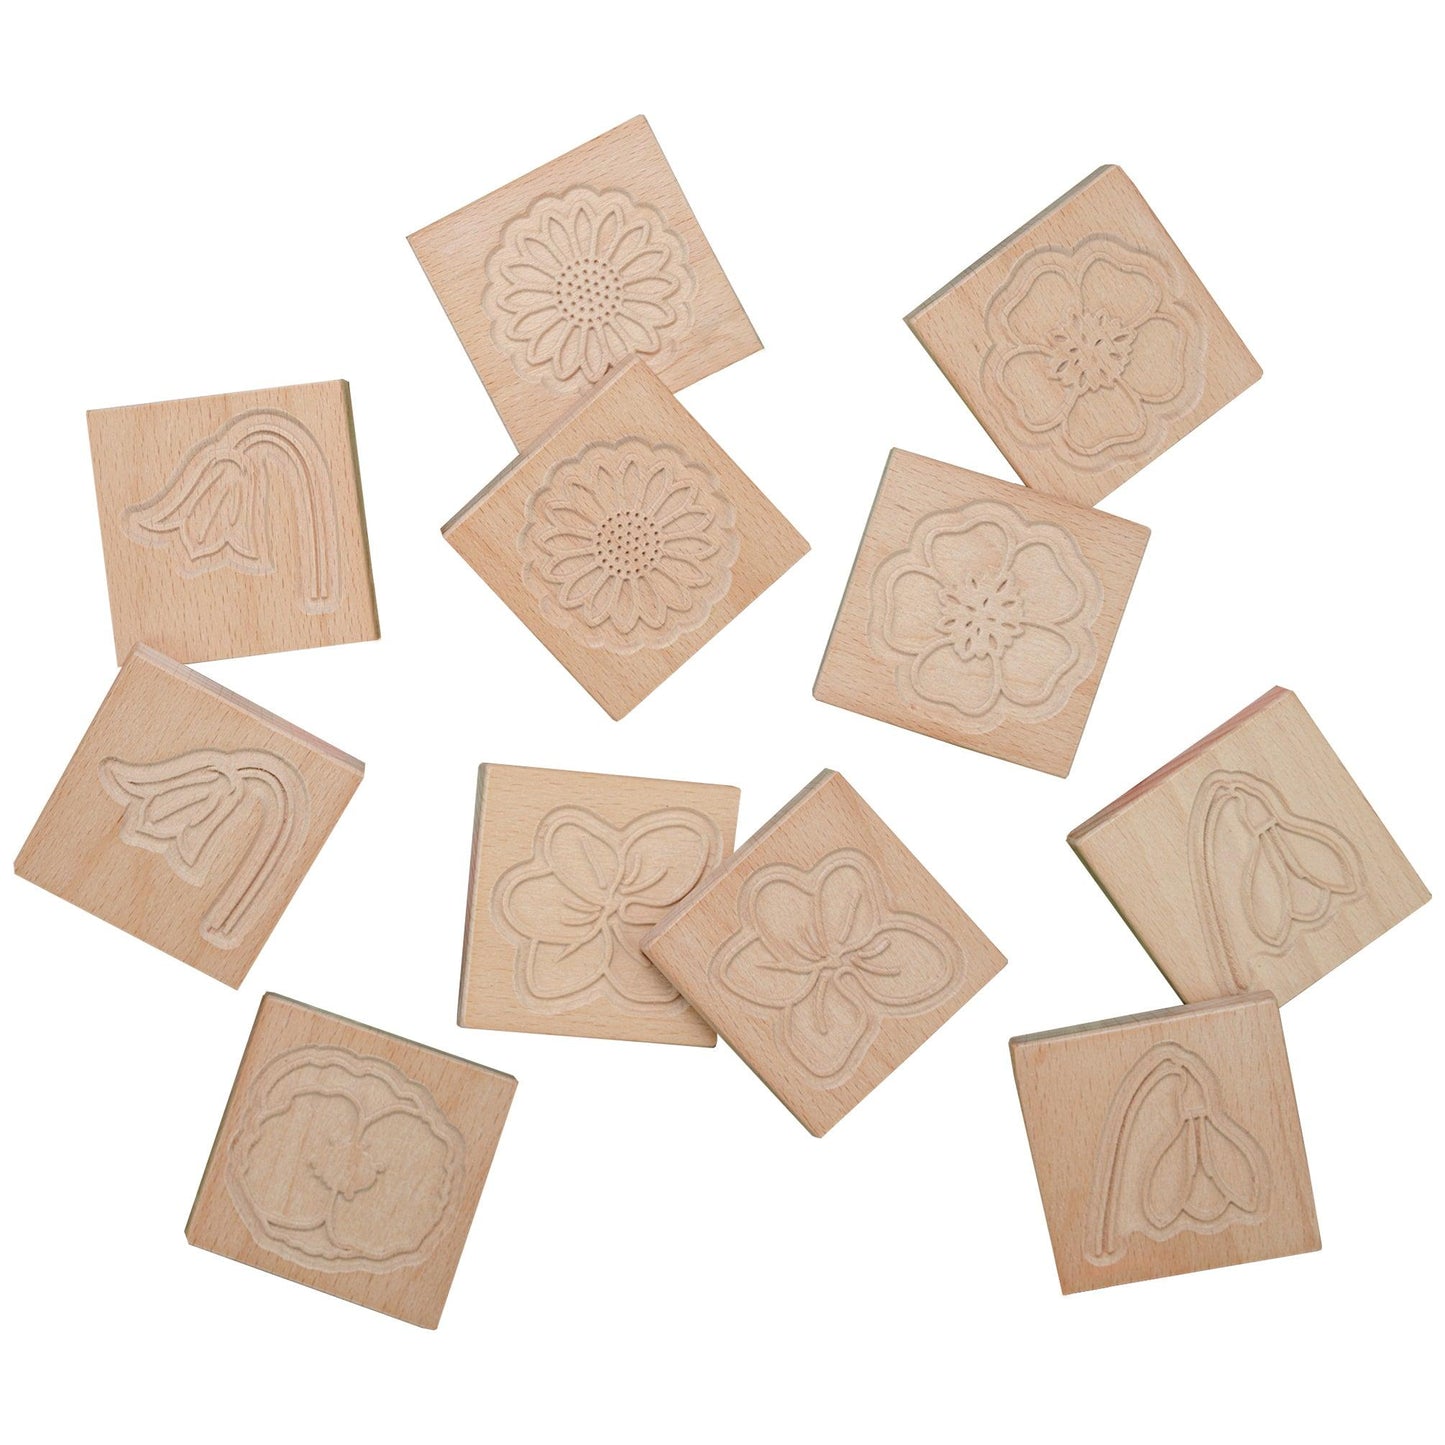 Wooden Tiles for Nature-inspired Play - Loomini